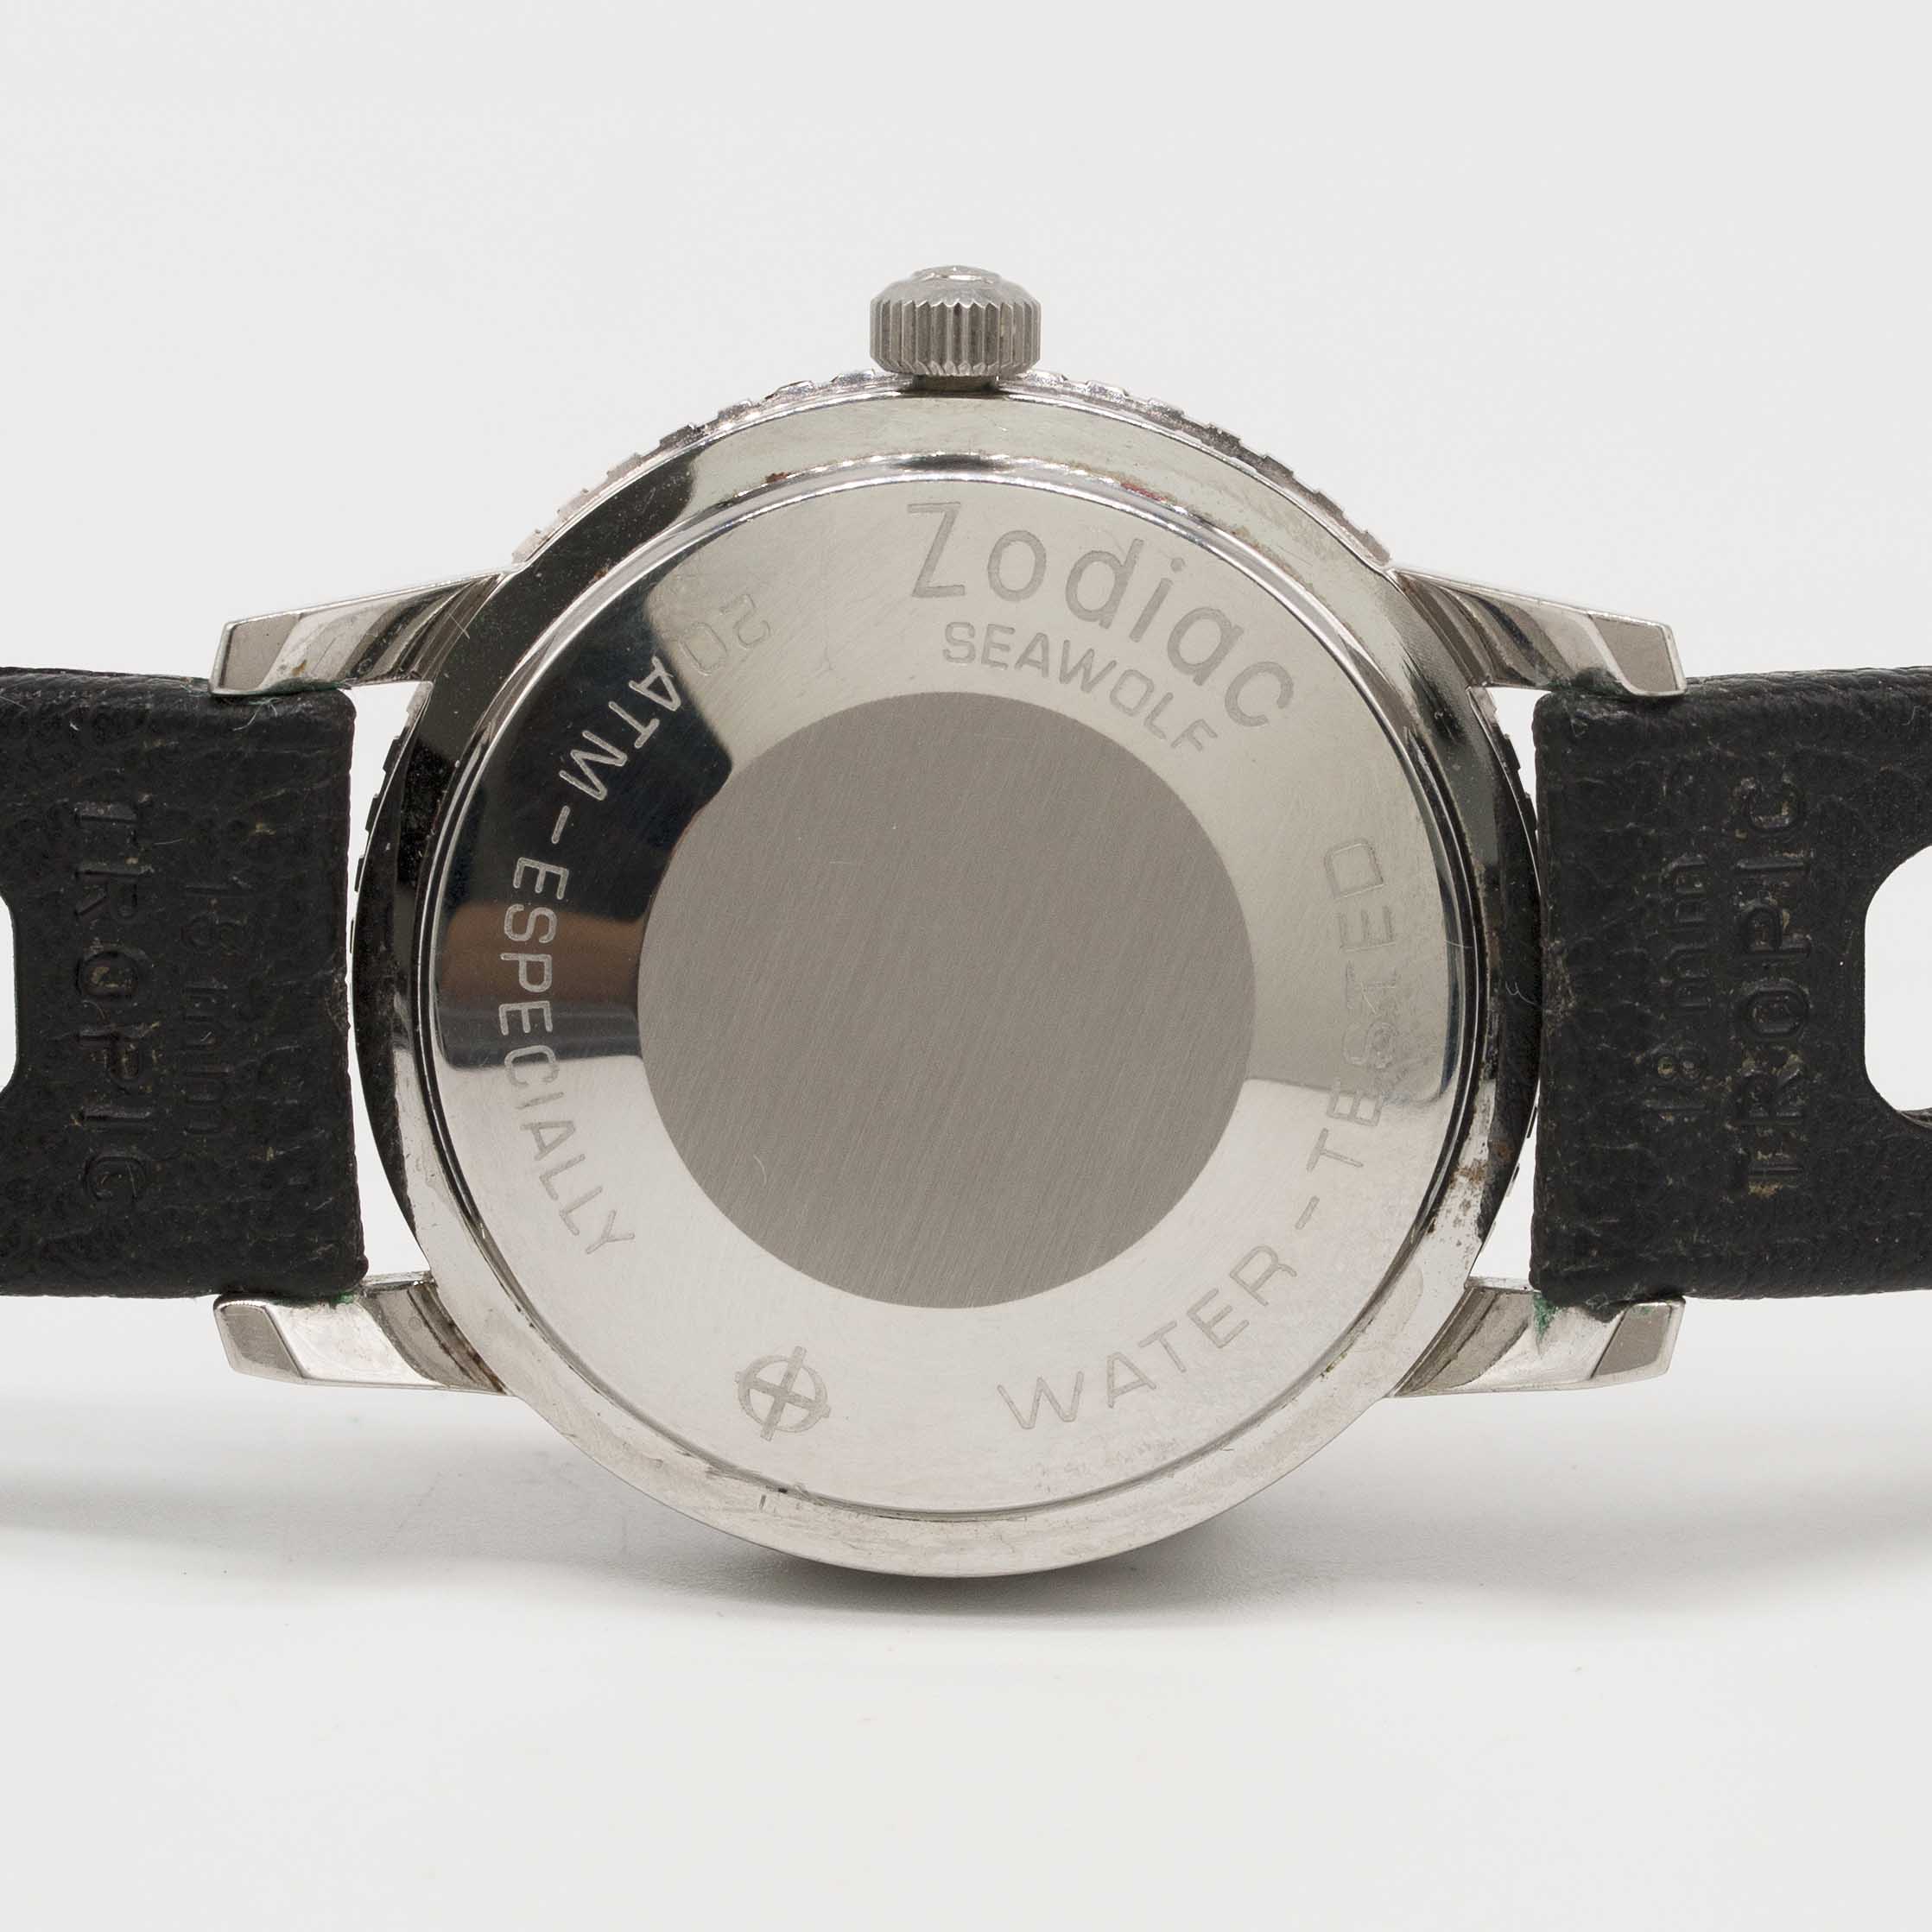 A GENTLEMAN'S STAINLESS STEEL ZODIAC SEA WOLF AUTOMATIC DIVERS WRIST WATCH CIRCA 1960s, REF. 722- - Image 4 of 5